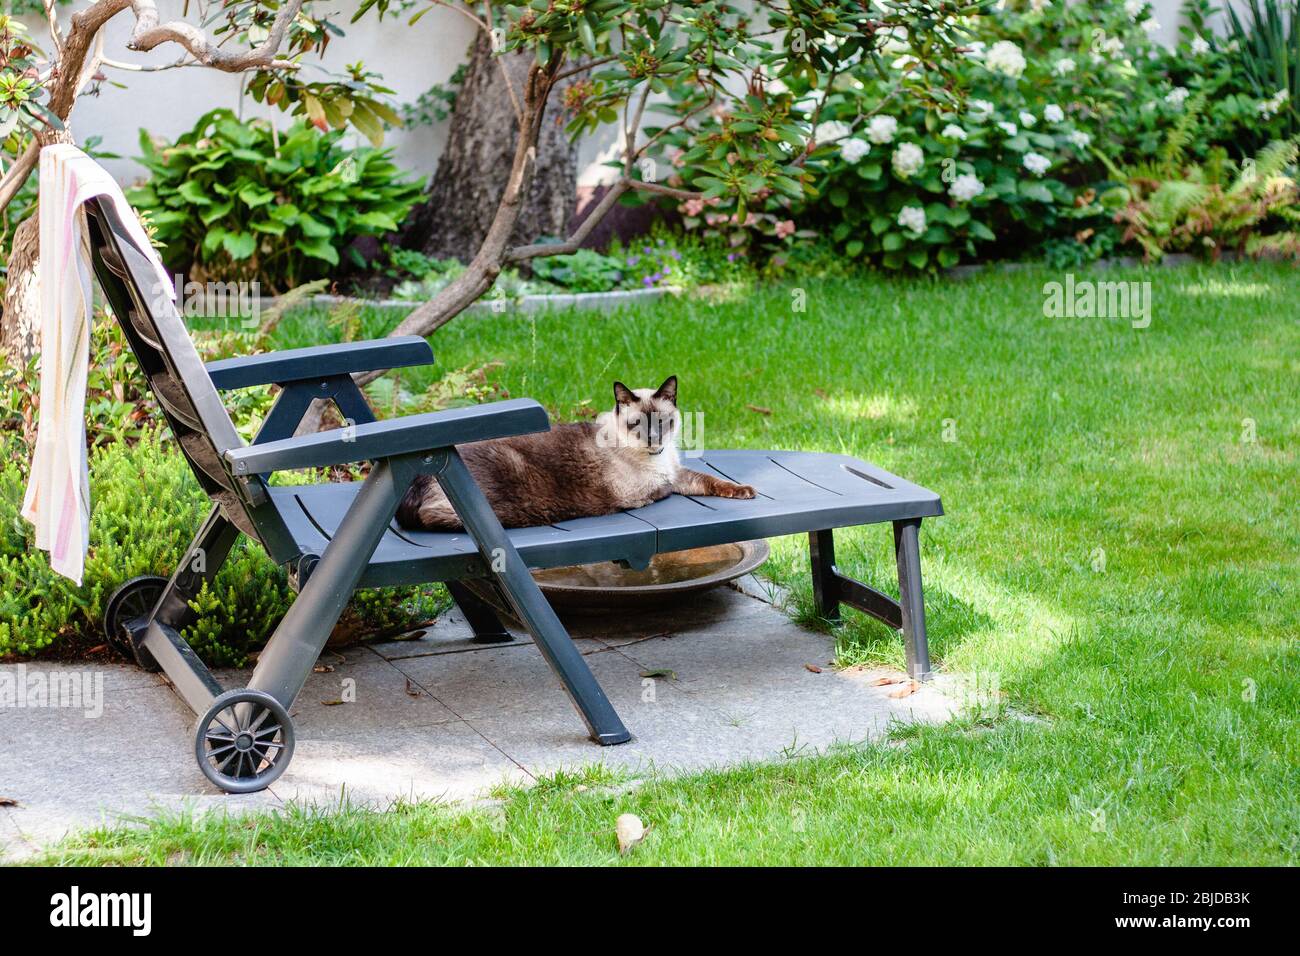 Animals, cat and dog relaxing in the beautiful garden Stock Photo